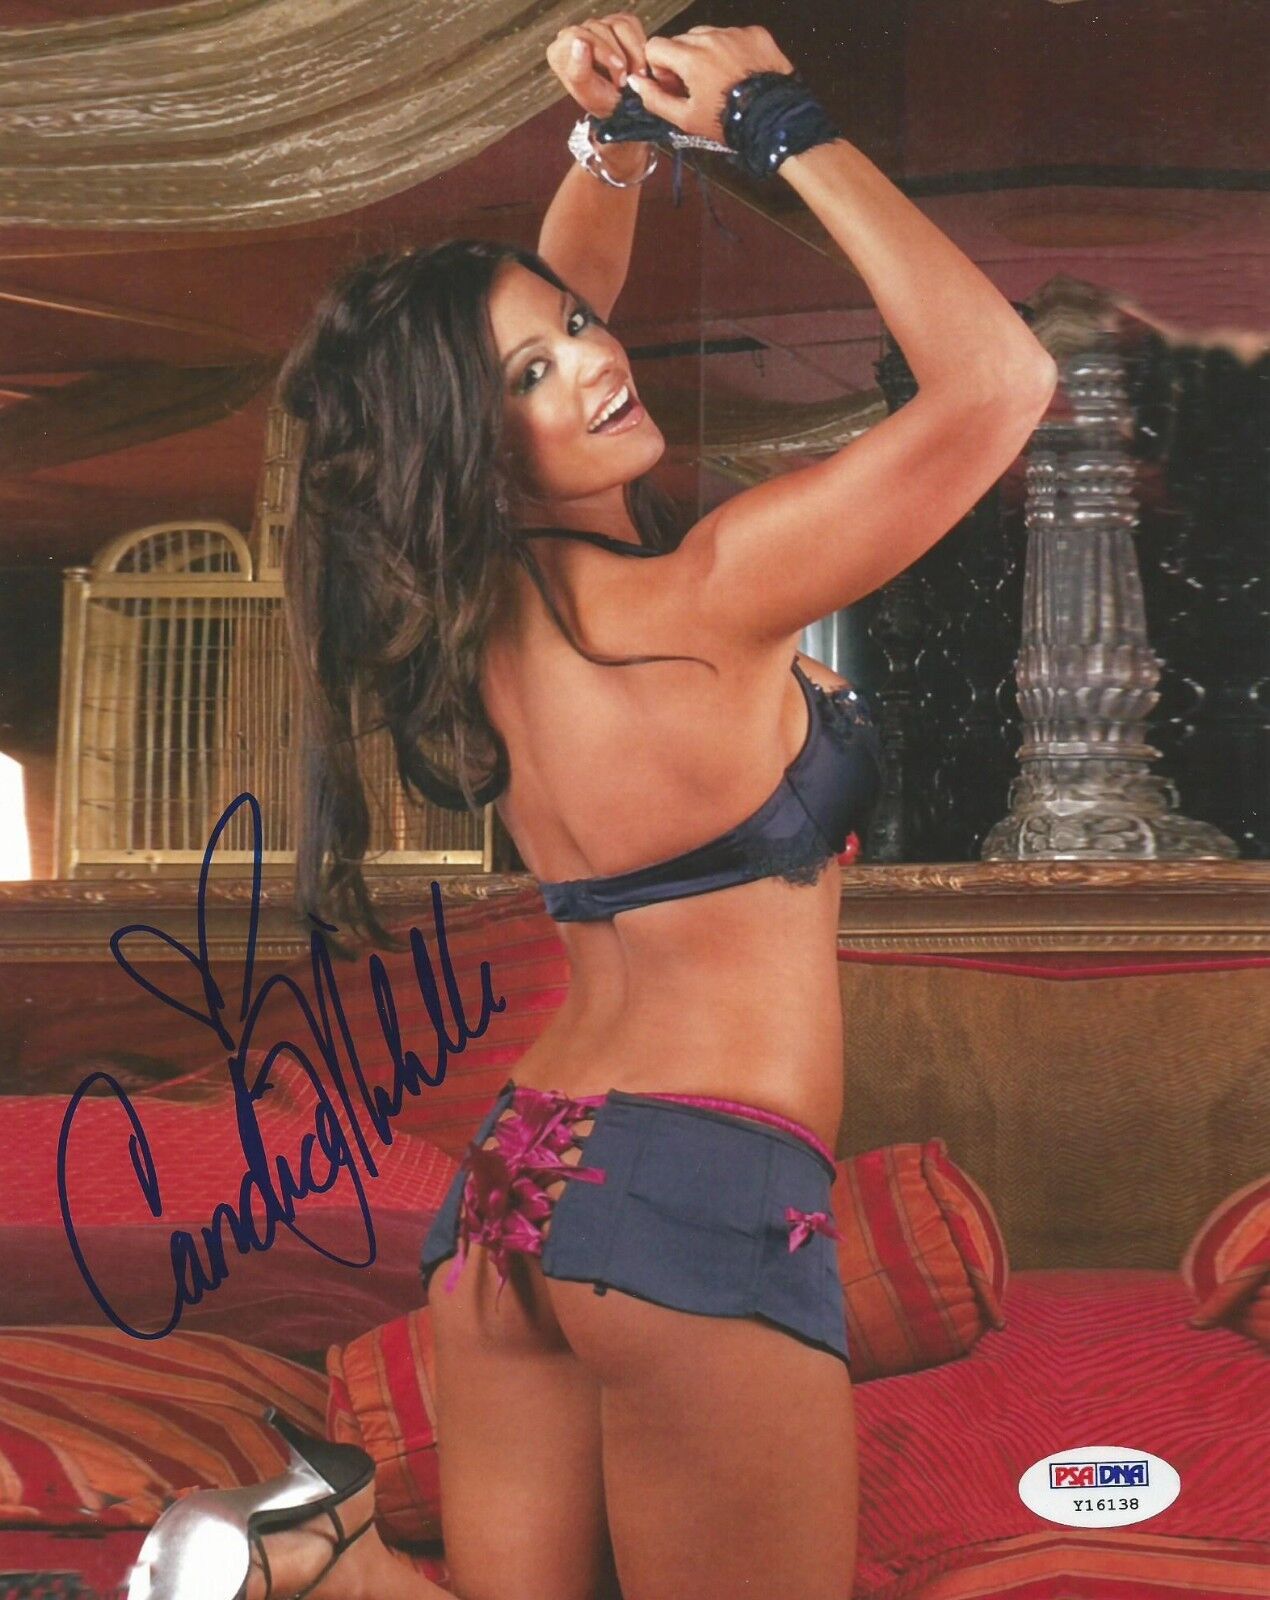 Candice Michelle Signed Playboy 8x10 Photo Poster painting PSA/DNA COA WWE Diva Picture Auto'd L